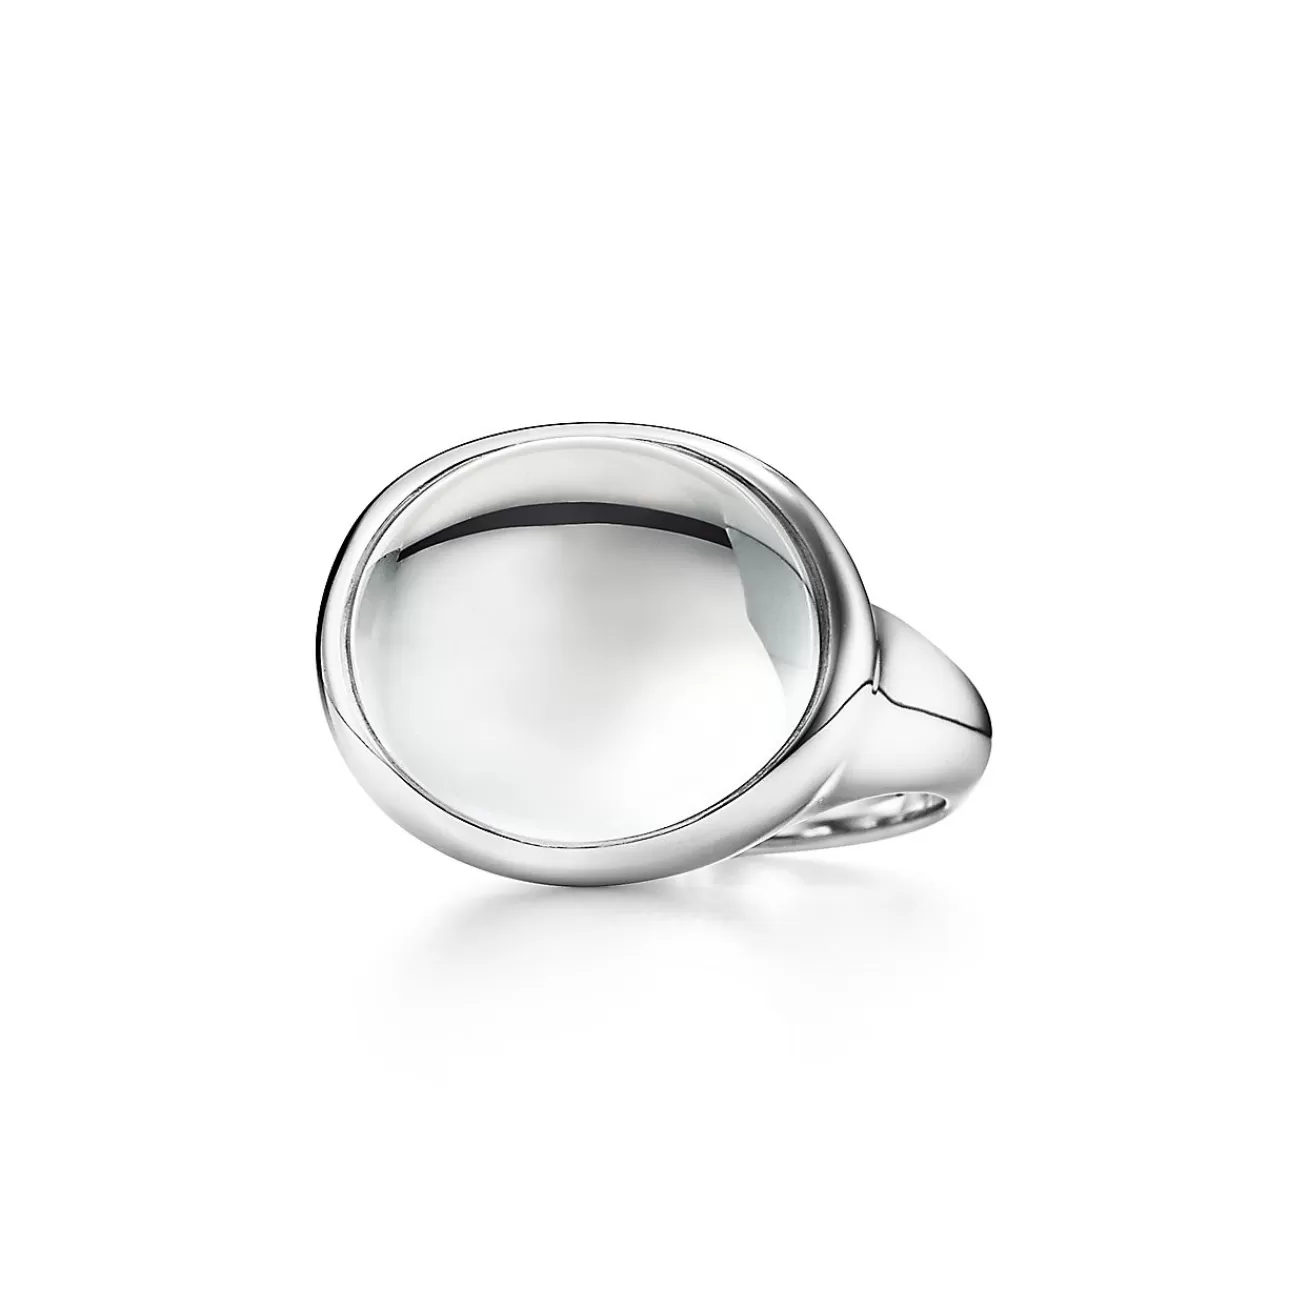 Tiffany & Co. Elsa Peretti® Cabochon ring in sterling silver with rock crystal, 15.5 mm wide. | ^ Rings | Sterling Silver Jewelry